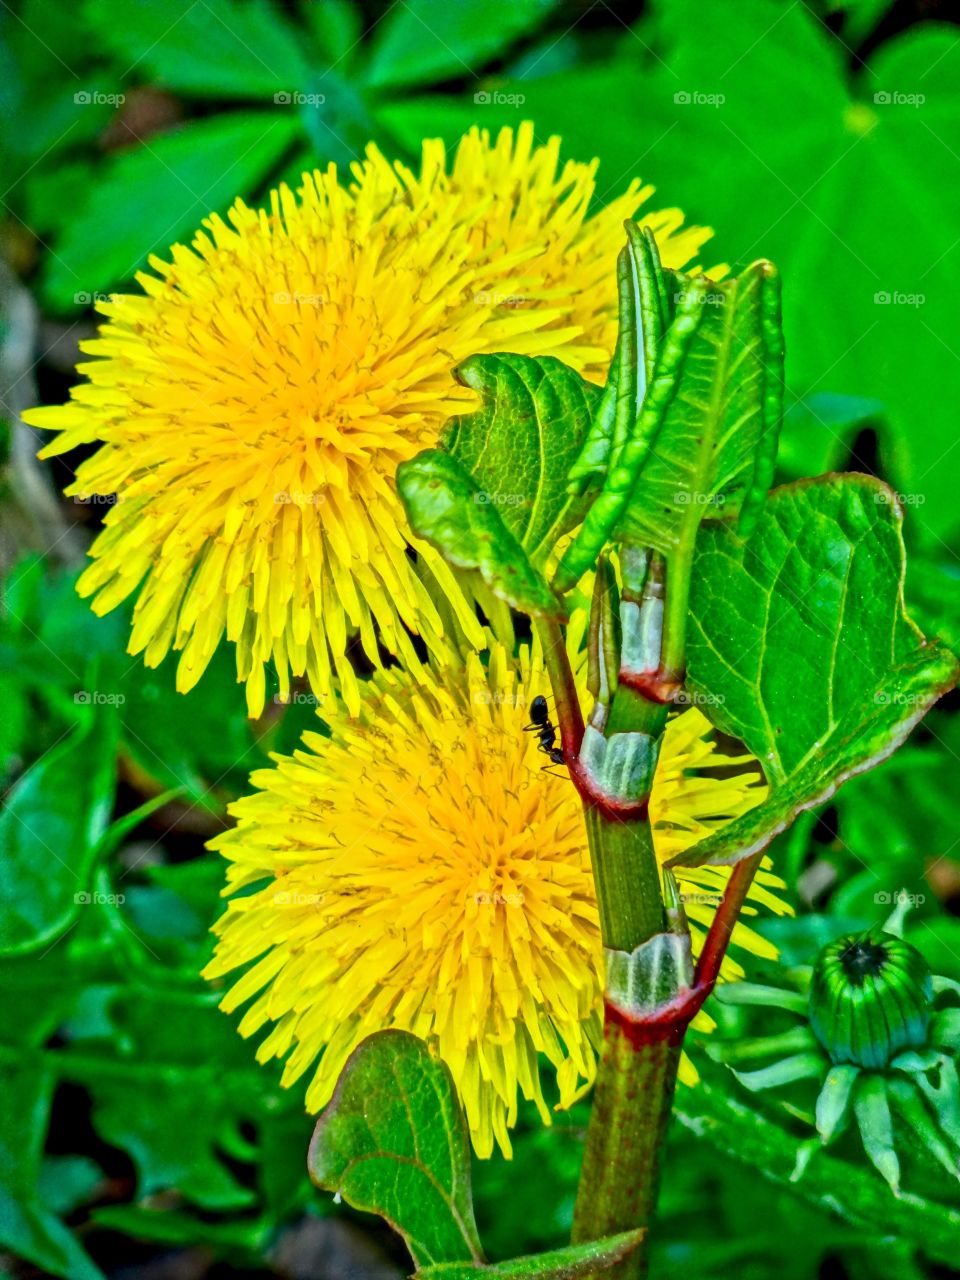 climbing the dandelions. Summertime means dandelions, allergies.... and ants. Found one climbing the stem of this group of brightly colored stems.